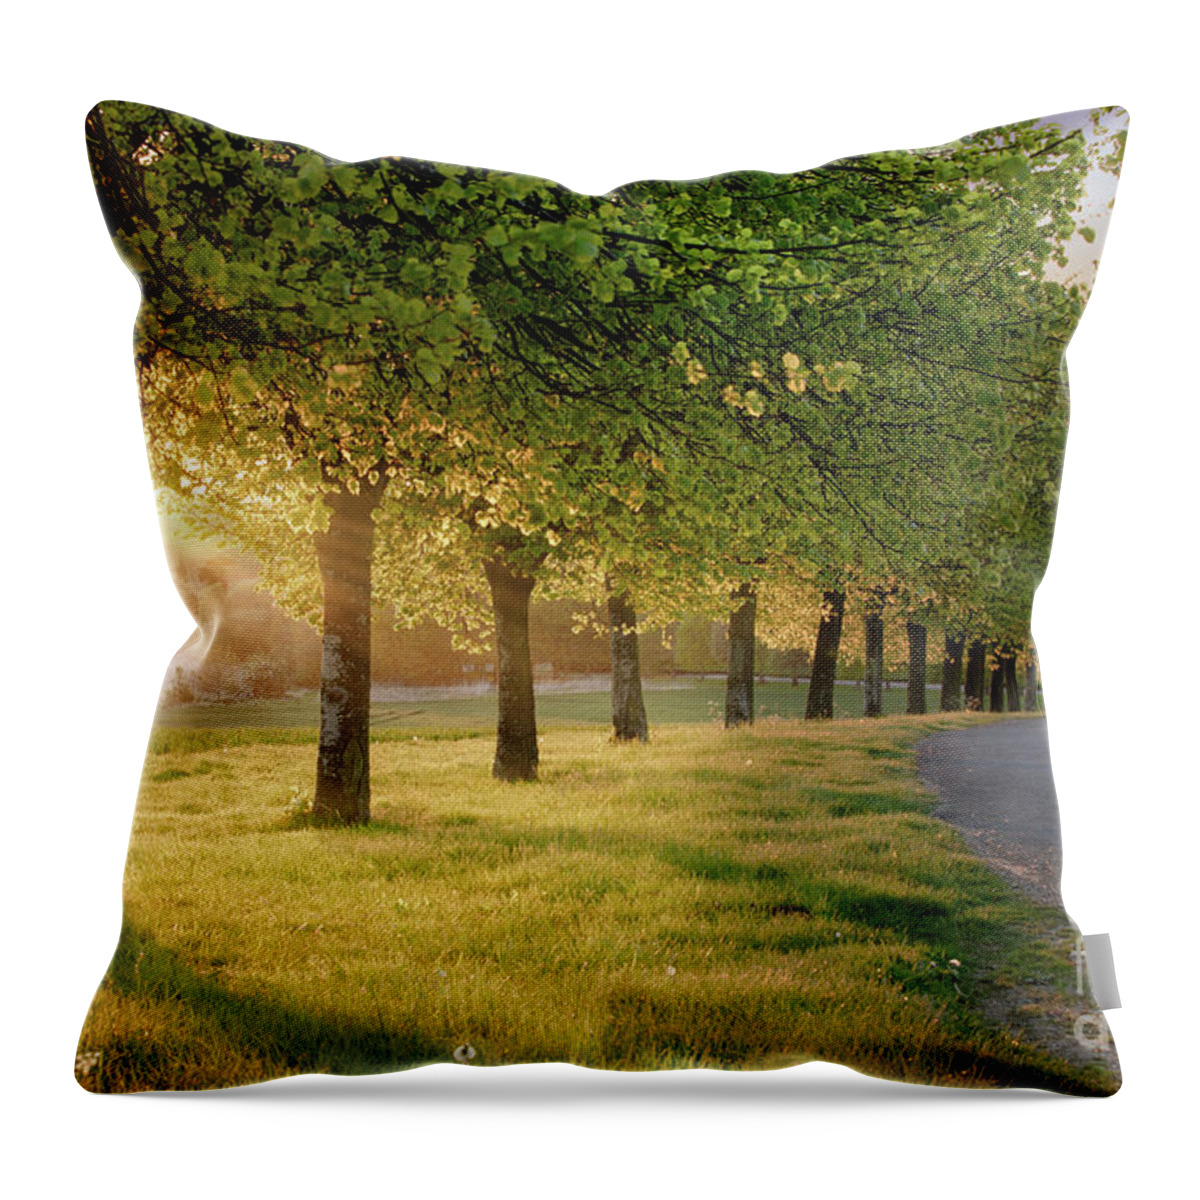 Road Throw Pillow featuring the photograph Rural road lined with trees at sunset by Simon Bratt